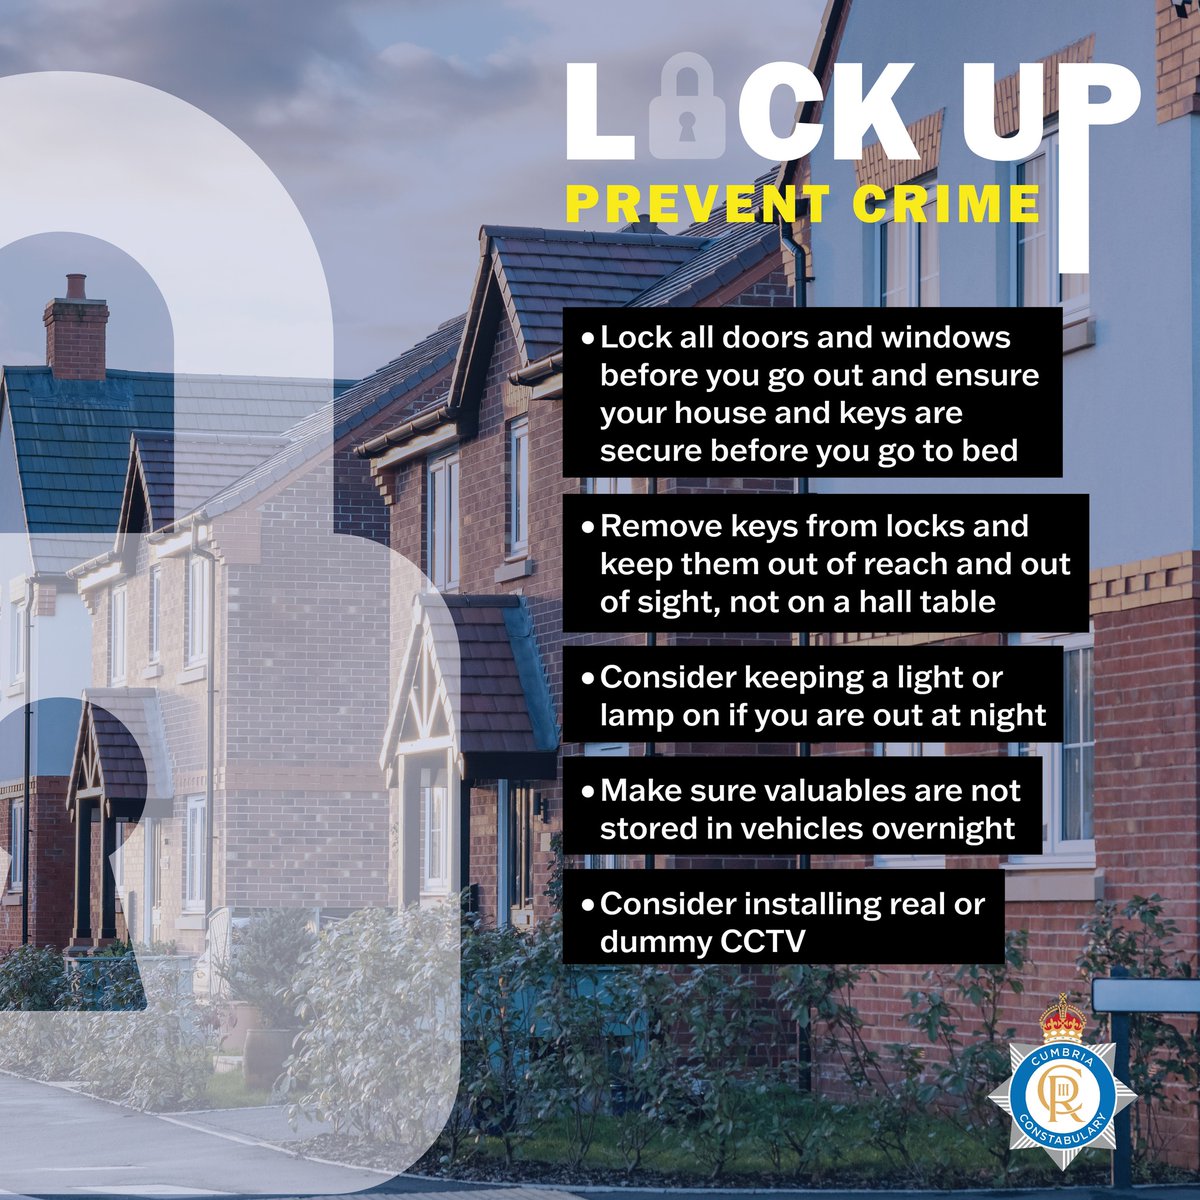 Be sure you’re secure. Got information? - Report online at orlo.uk/D7XA3 - Phone 101 - Dial 999 in an emergency - You can contact Crimestoppers anonymously on 0800 555 111